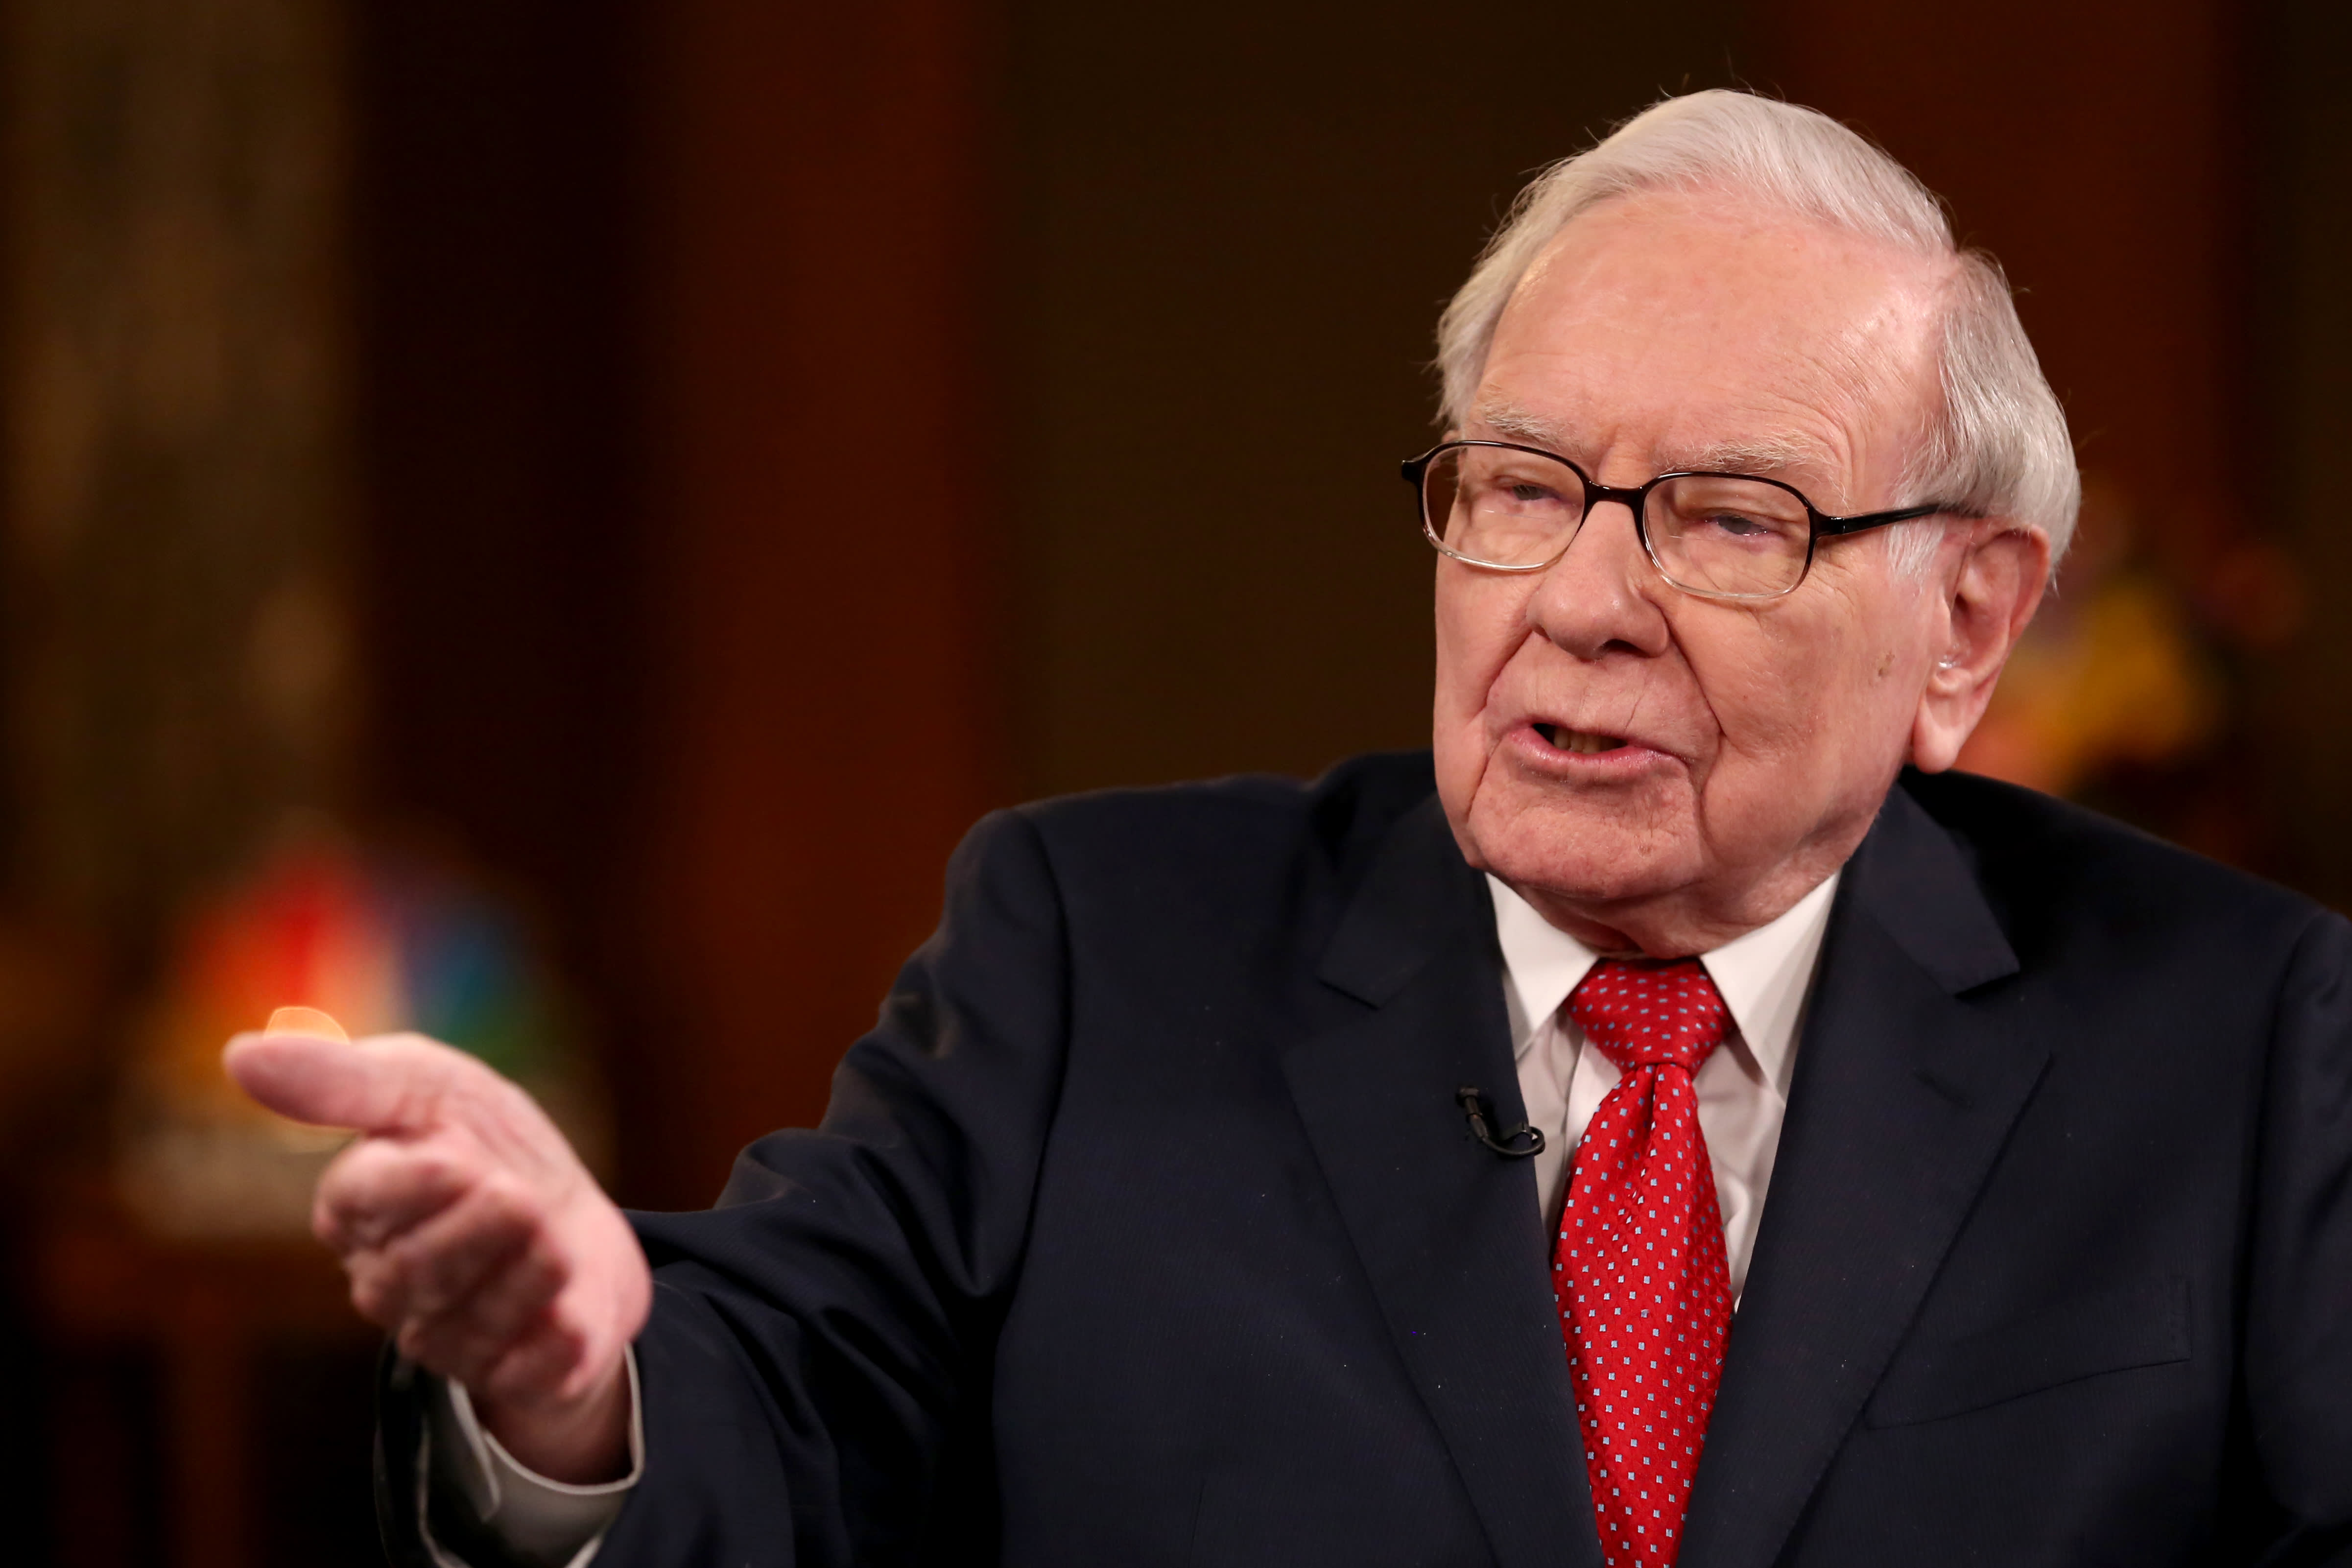 Buffett buys back more Berkshire shares this year after a record $ 25 billion in 2020